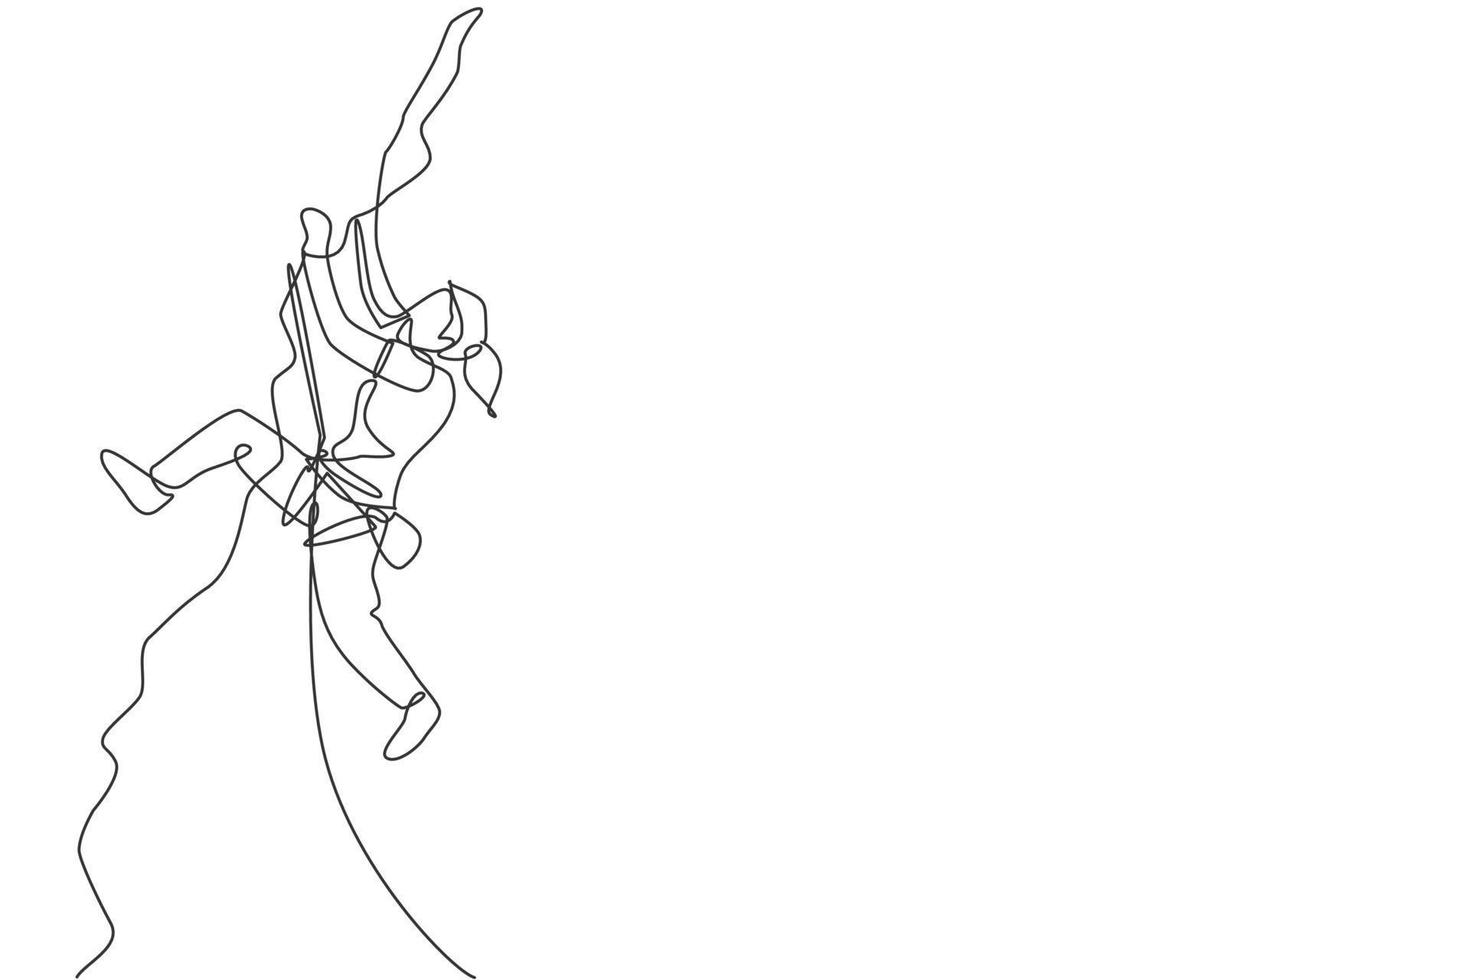 One single line drawing young active woman climbing on cliff mountain holding safety rope vector illustration graphic. Extreme outdoor sport and bouldering concept. Modern continuous line draw design